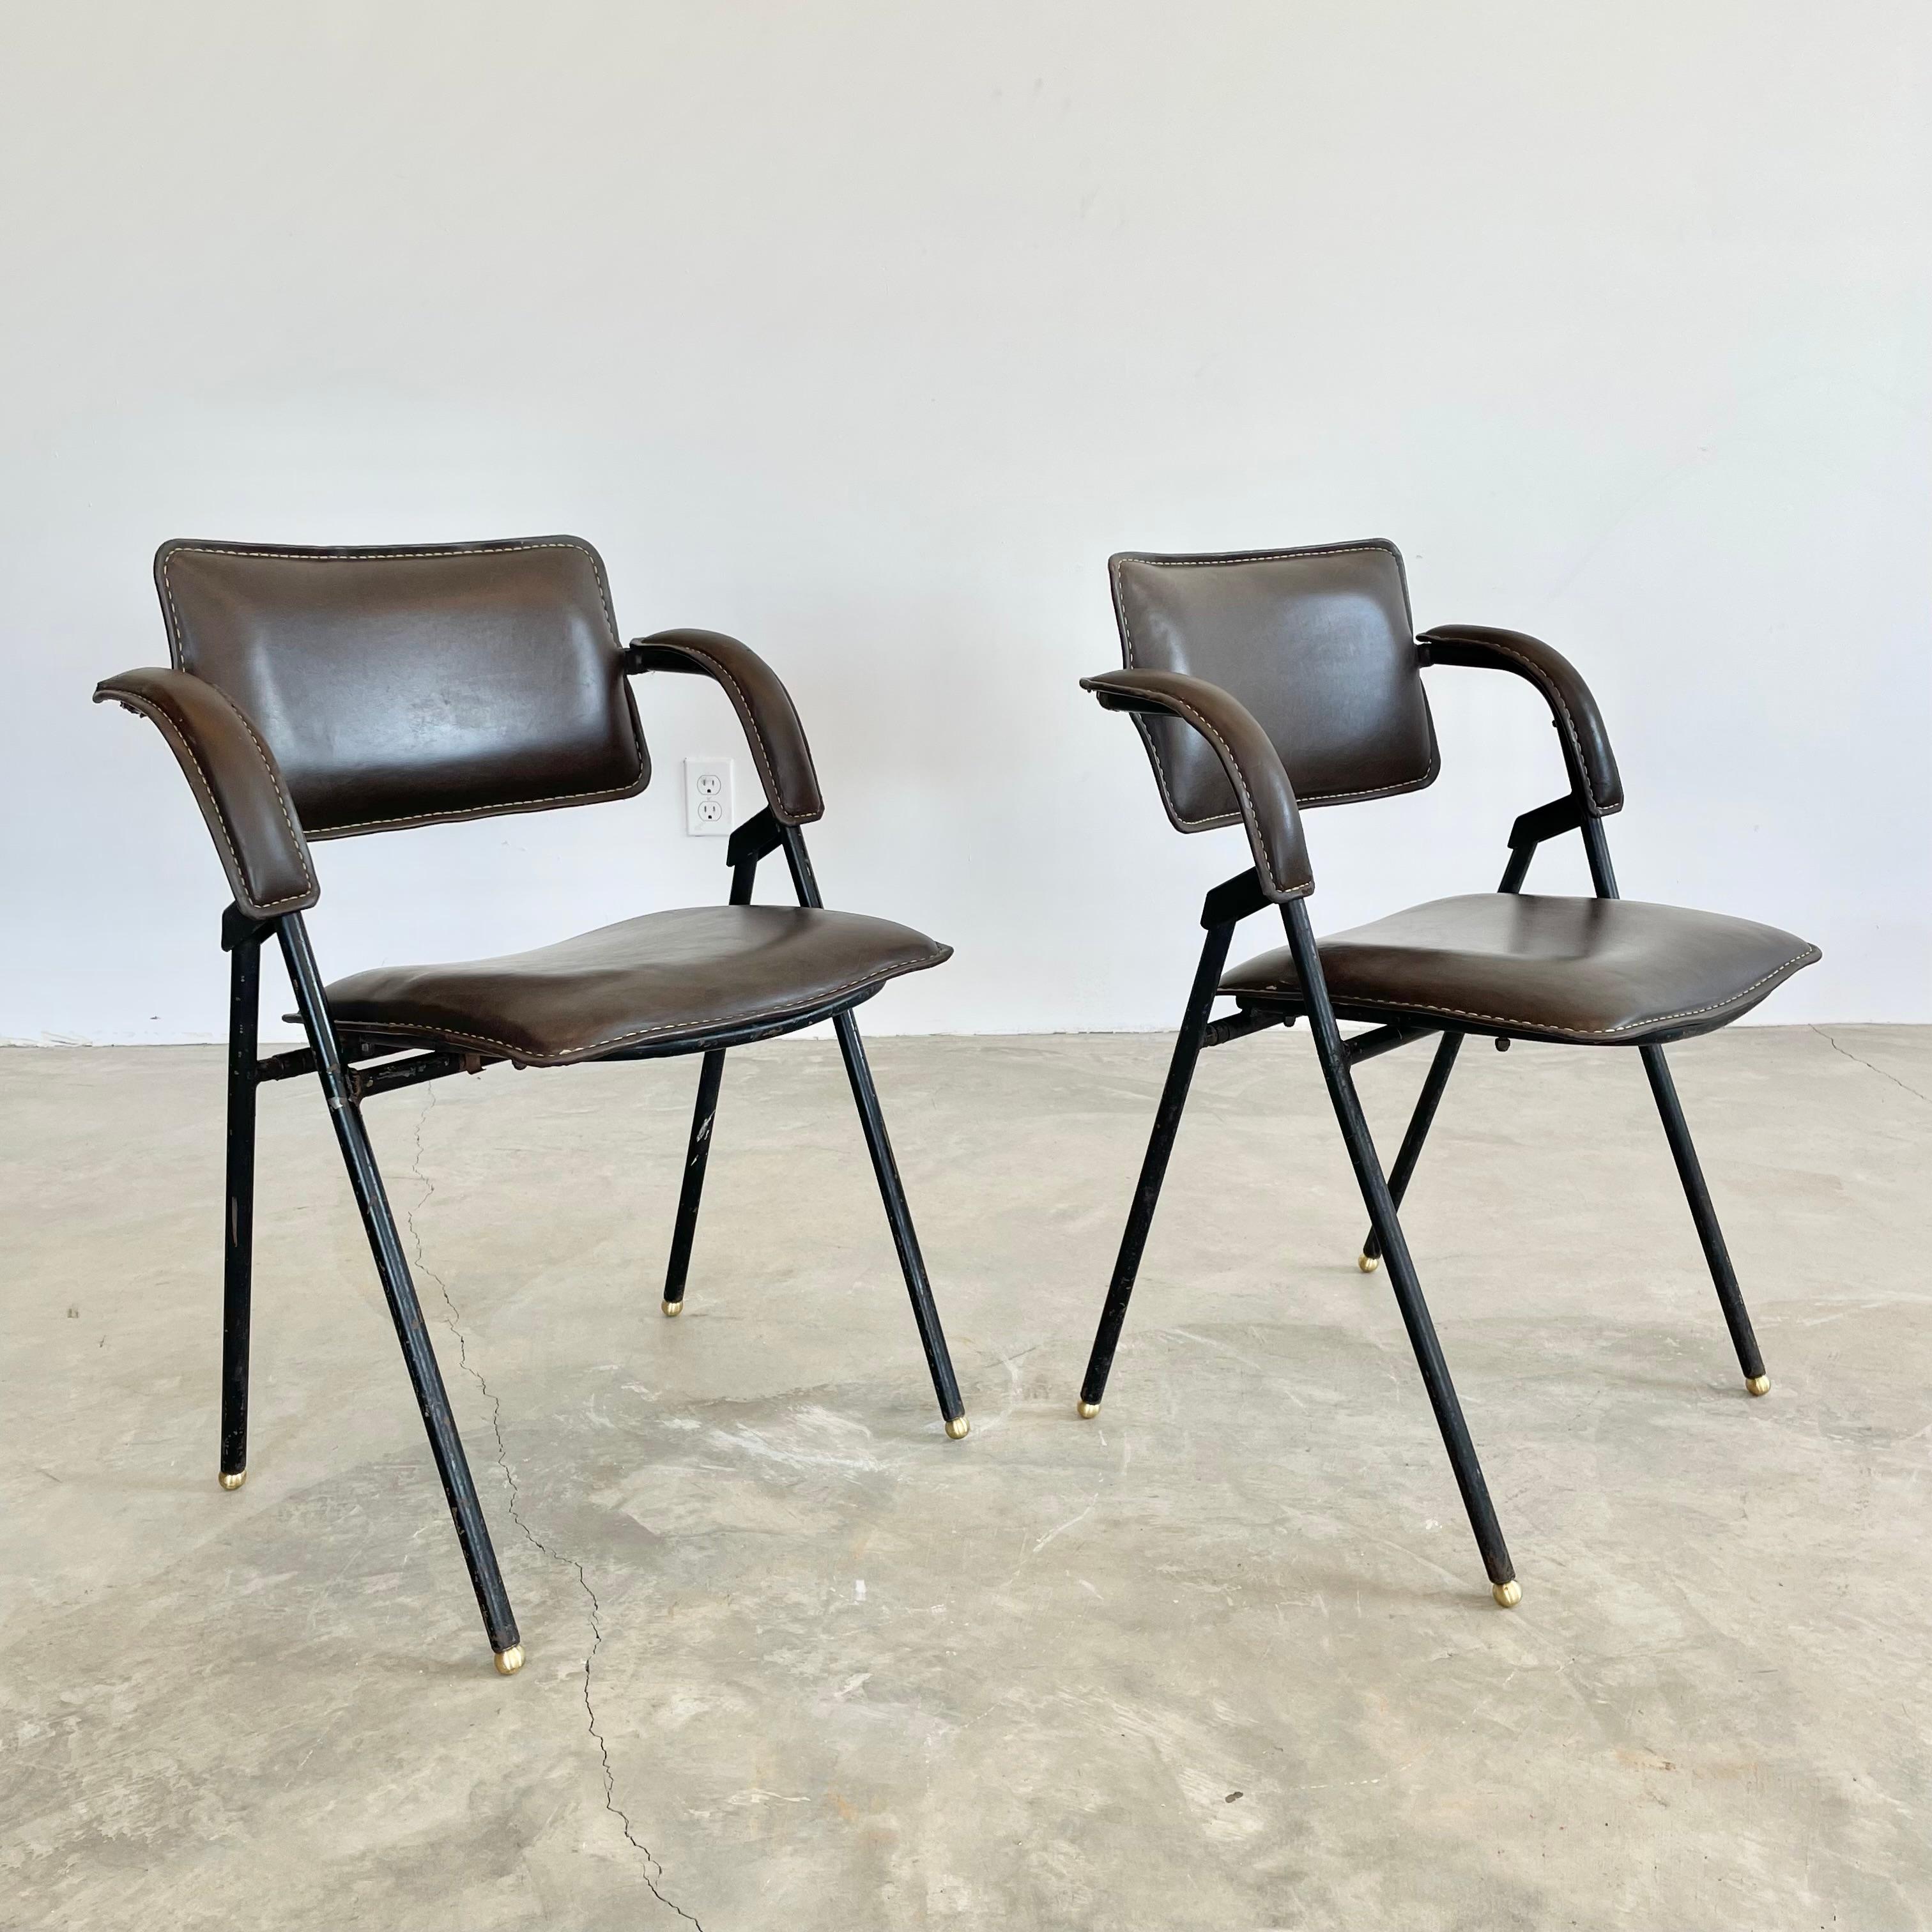 Stunning foldable chair by French designer Jacques Adnet. Iron frame with chocolate brown Skai seat and seat back. Signature Adnet contrast stitching throughout. Brass ball feet. Both chairs fold down if desired. In good original condition with